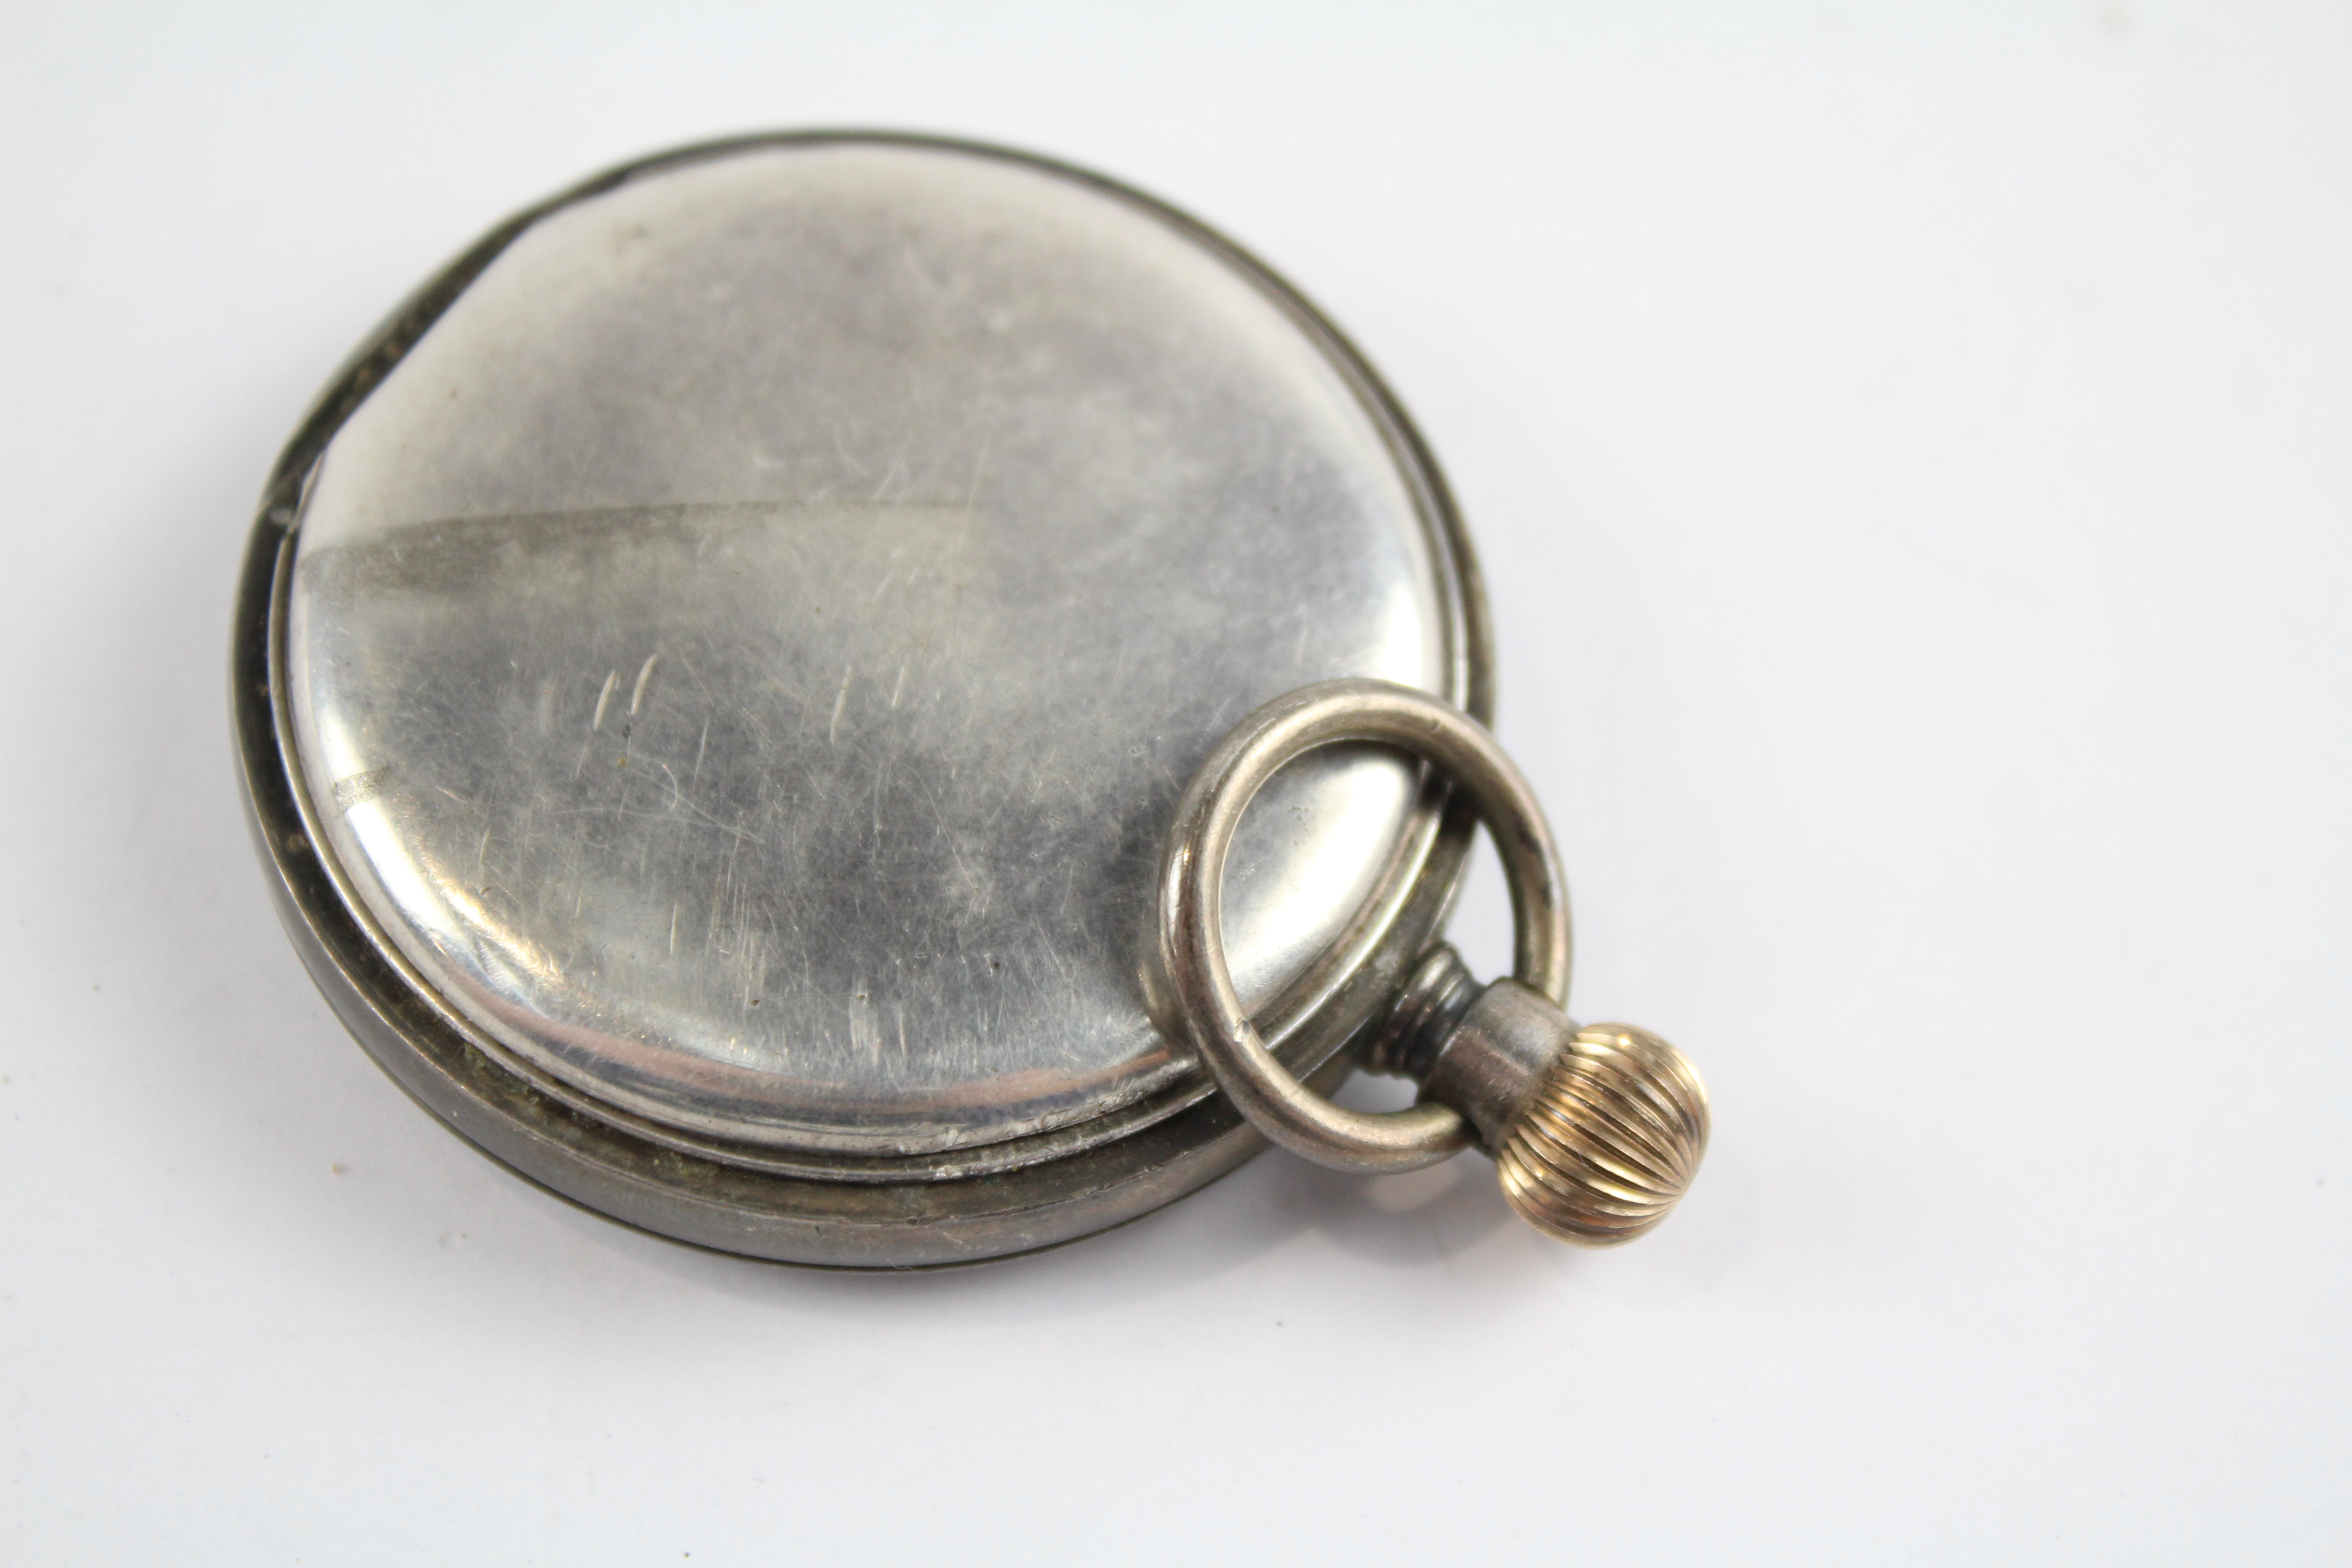 STERLING SILVER Gents Vintage Open Face POCKET WATCH Hand-Wind WORKING 404724 - Image 4 of 5